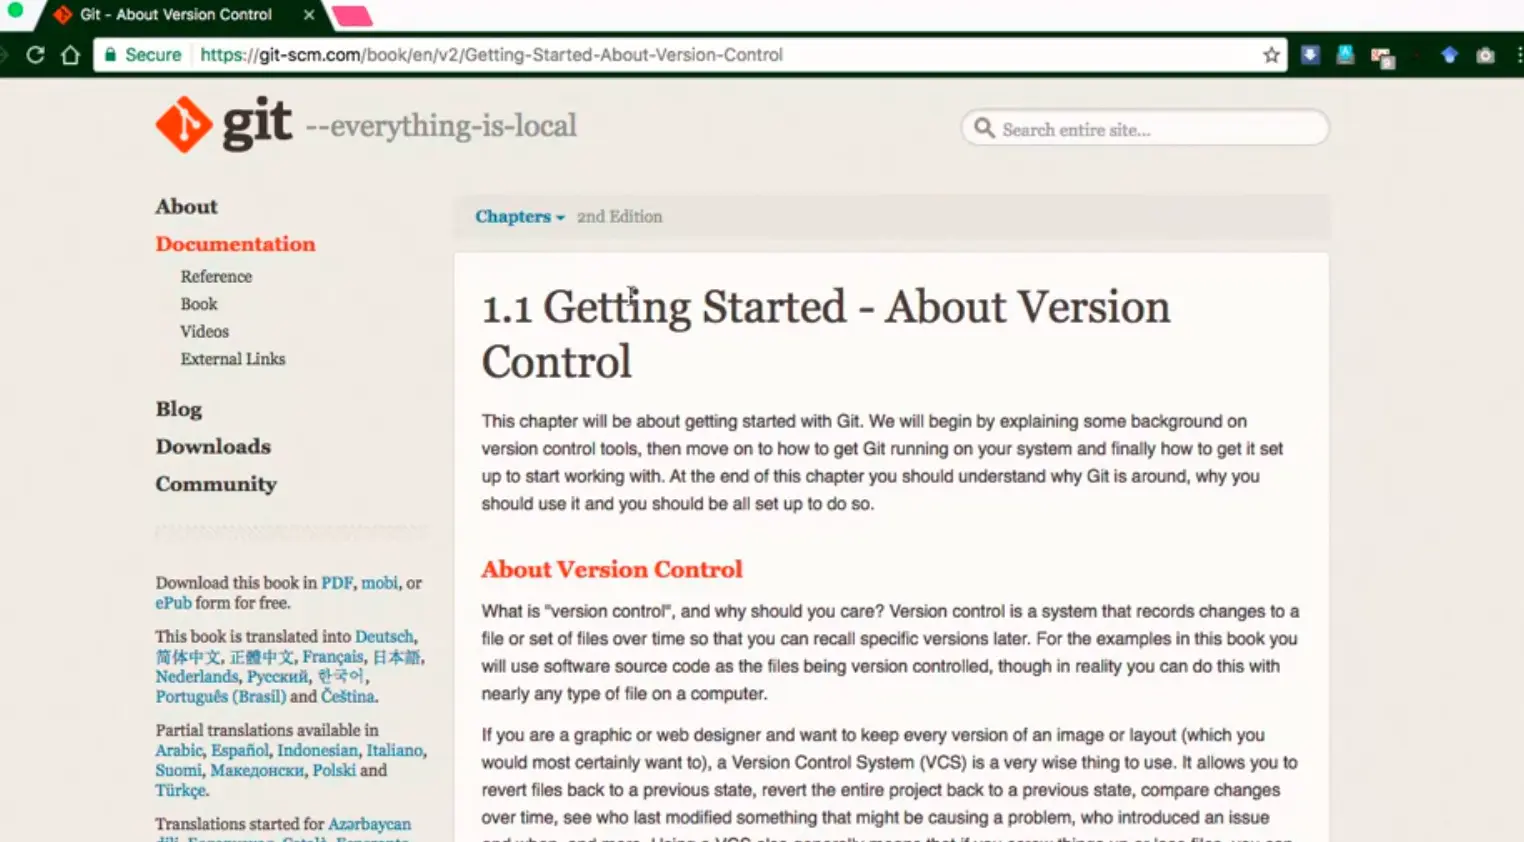 Getting started - version control system.